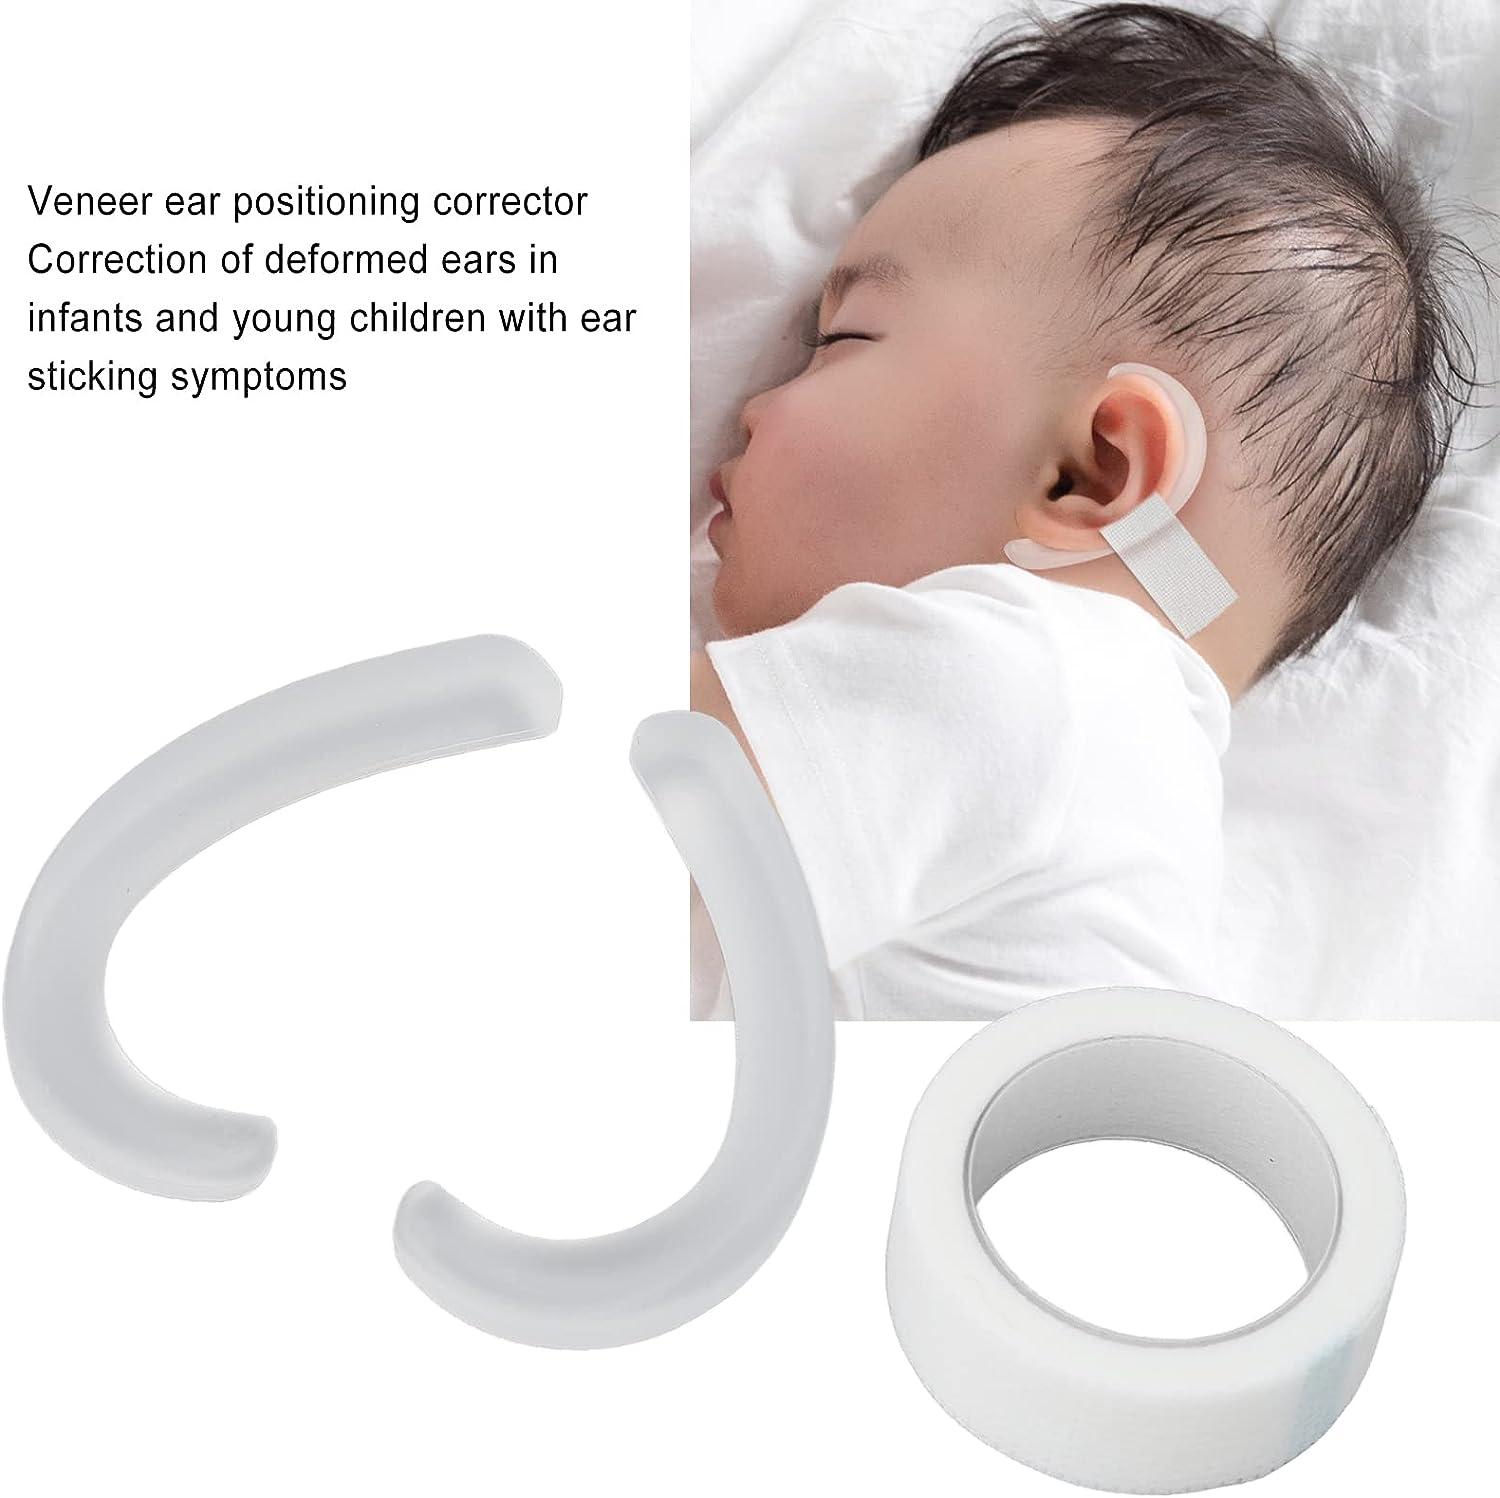 Baby Ear Corrector Auricle Silicone Correction Patch Comfortable